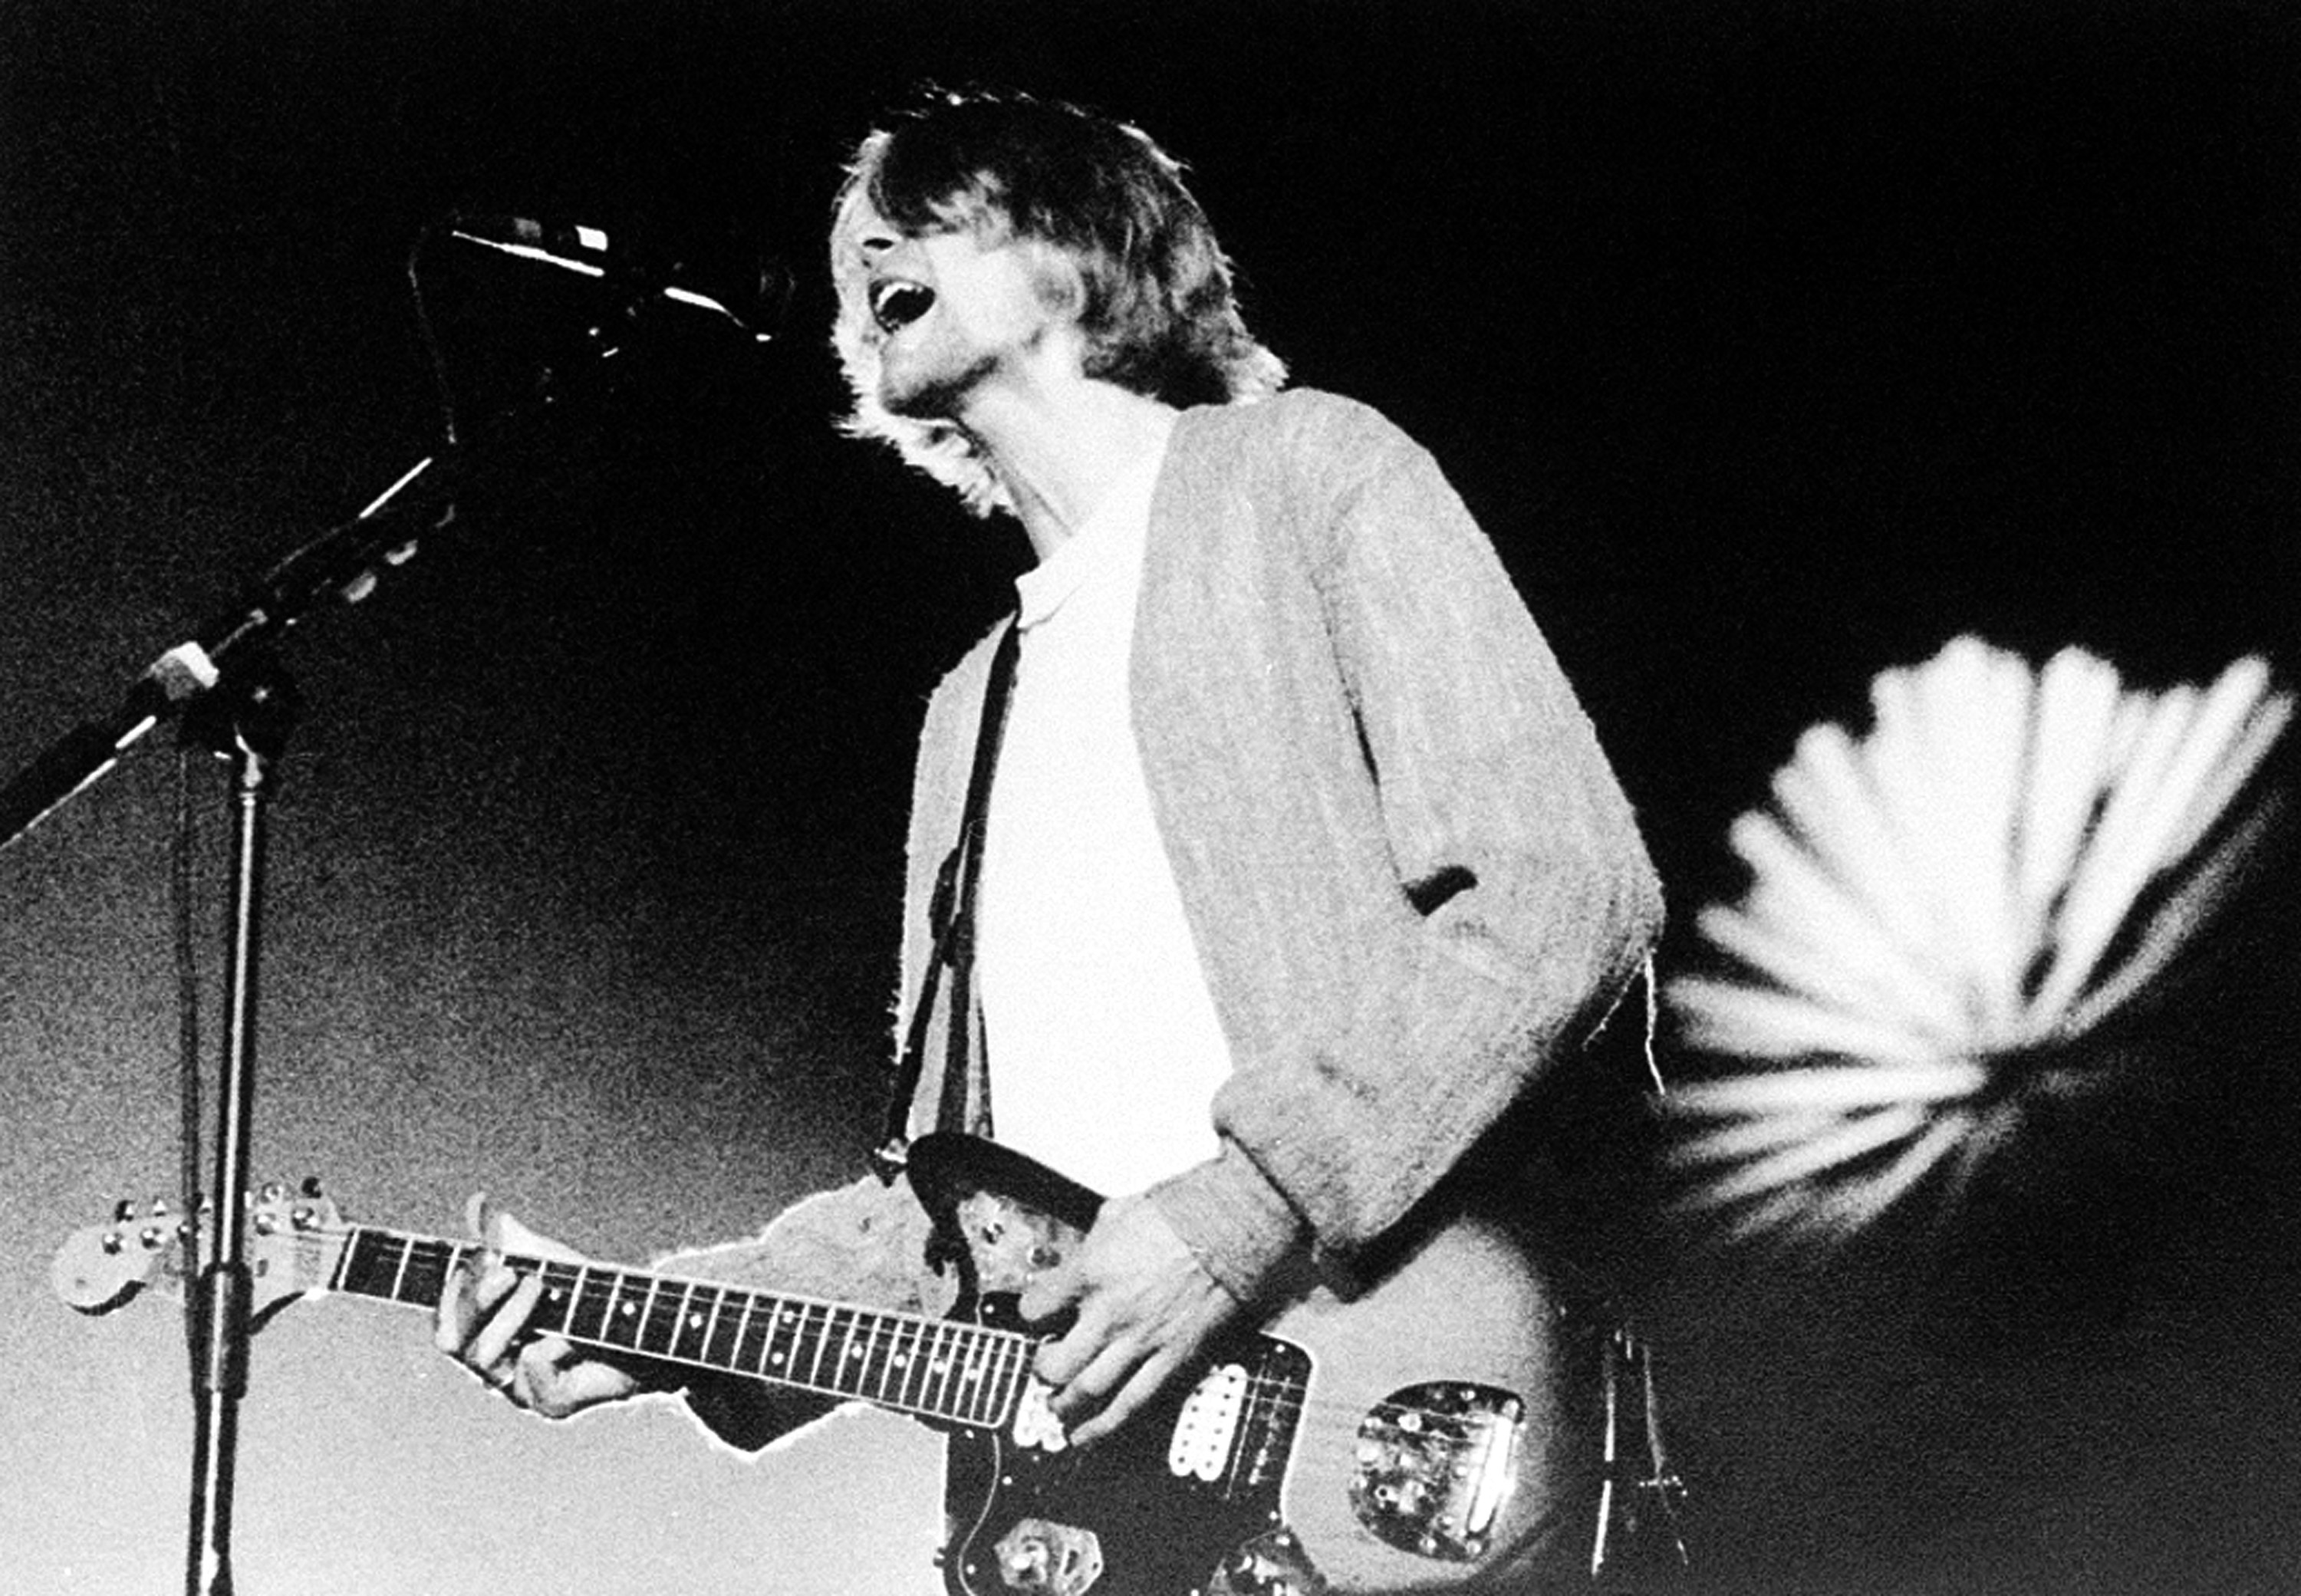 HBO doc to feature unreleased Kurt Cobain song